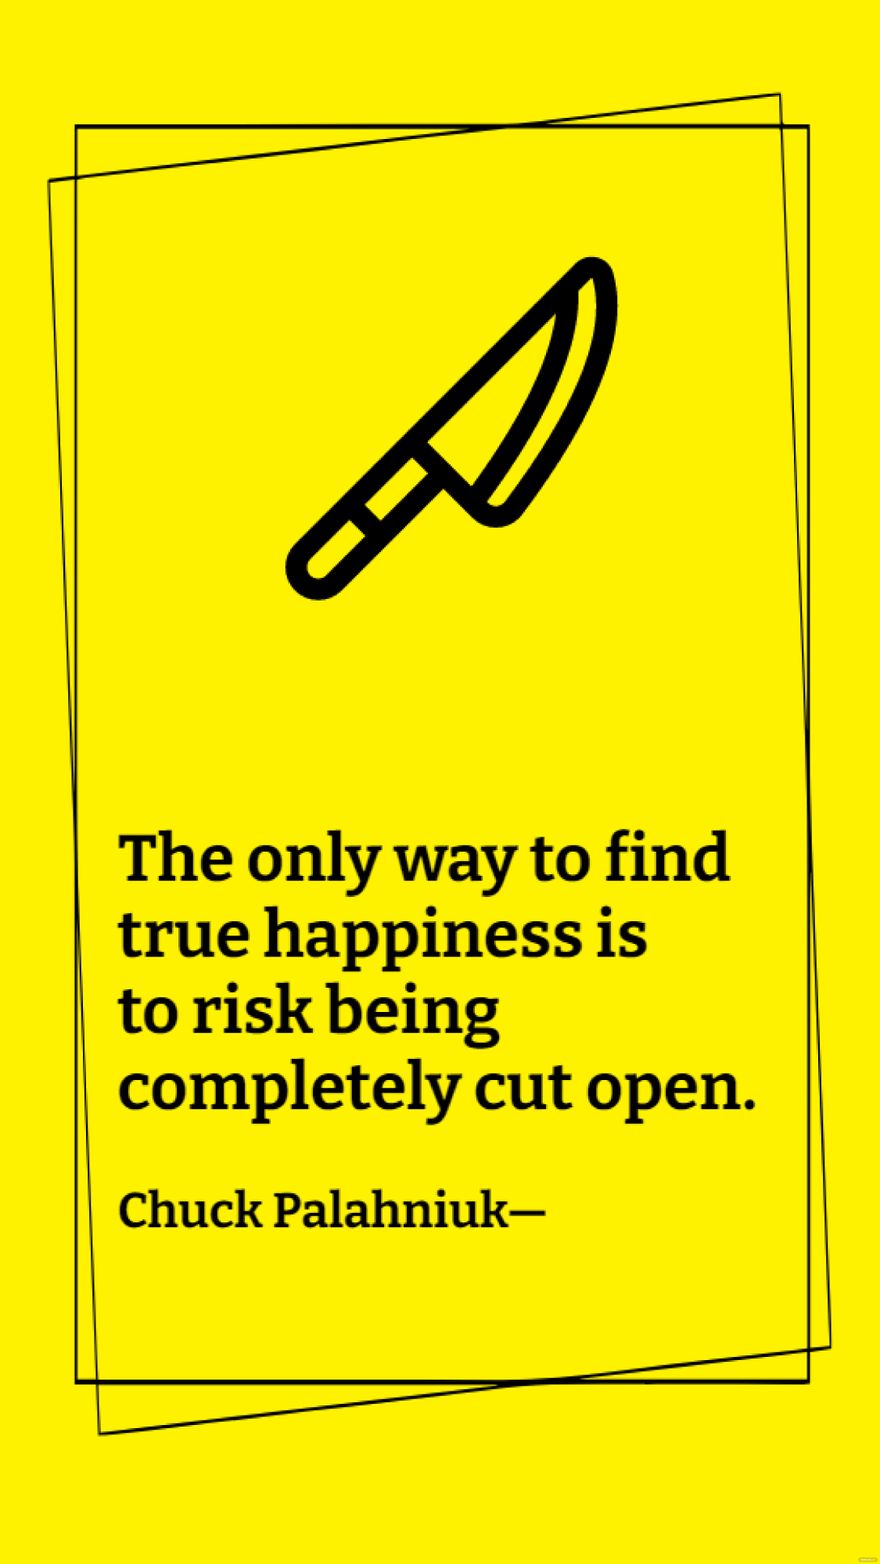 Chuck Palahniuk - The only way to find true happiness is to risk being completely cut open.